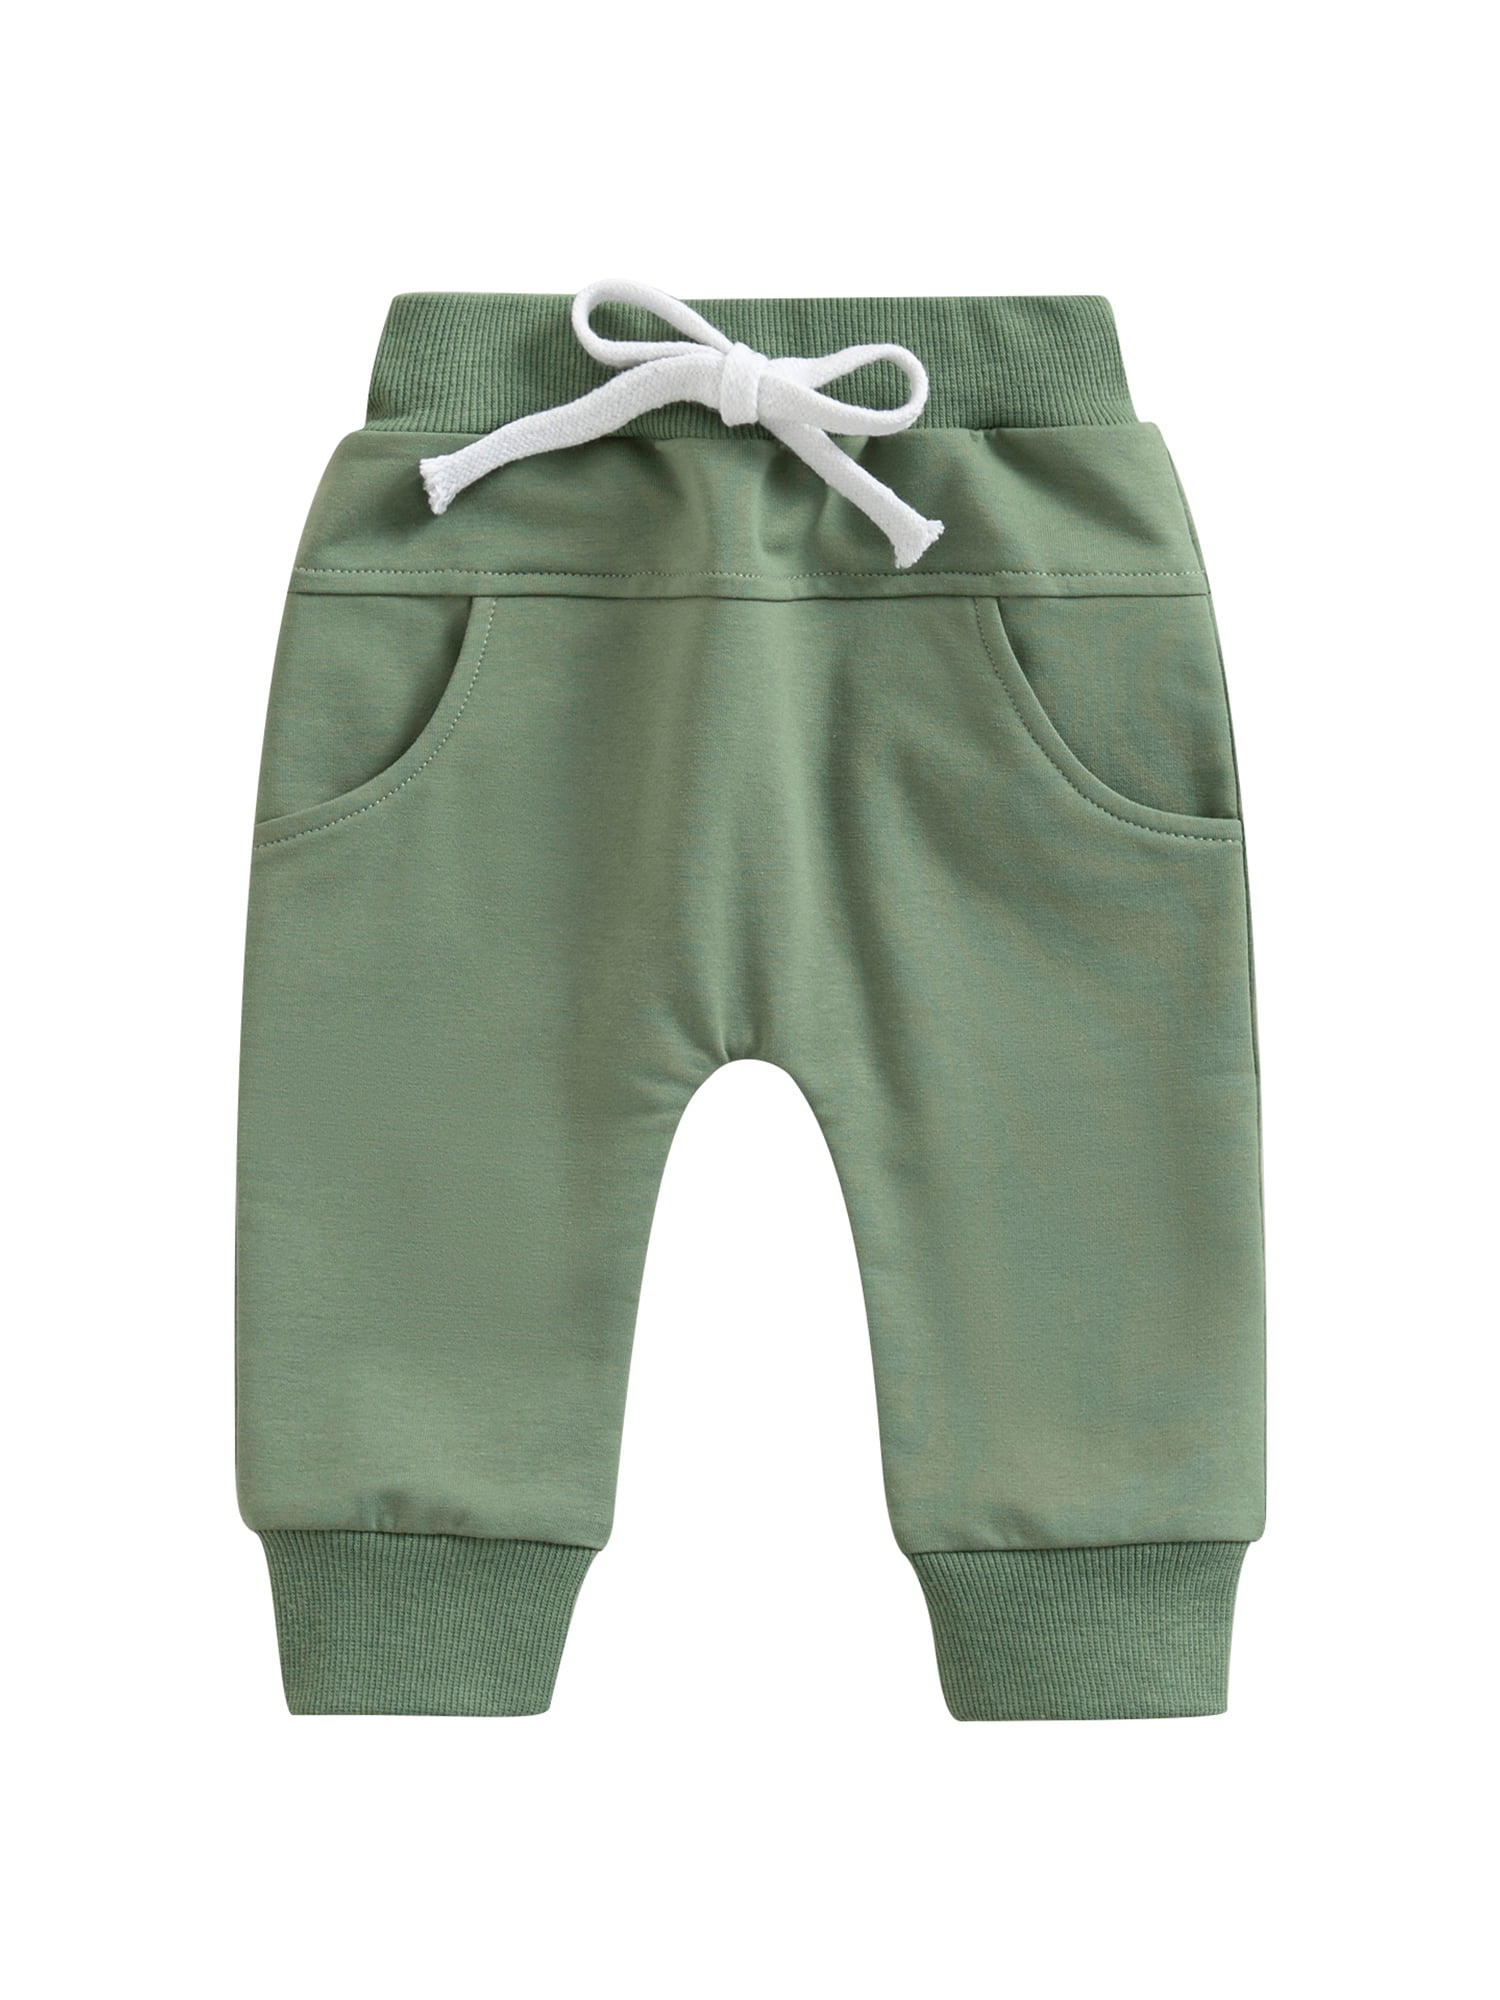 ZHAGHMIN Boys Jogger Toddler Children Kids Baby Boys Girls Solid Pants  Trousers Outfits Clothes 3 Month Baby Leggings Dressy Baby Boy Outfits Boys  18